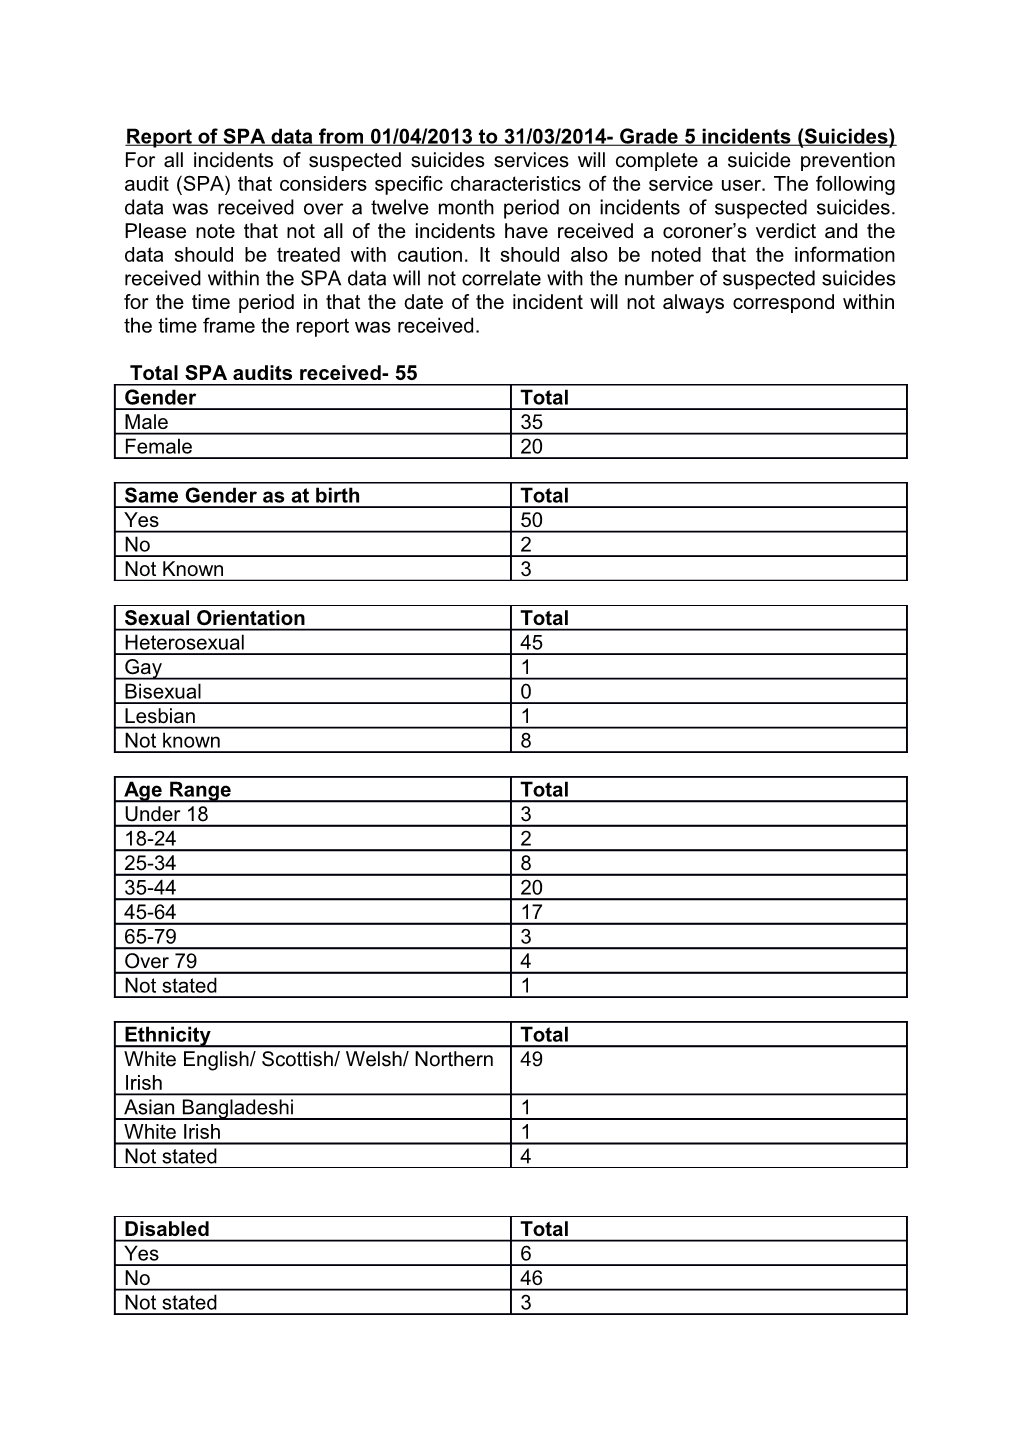 Report of SPA Data from 01/04/2013 to 31/03/2014- Grade 5 Incidents (Suicides)